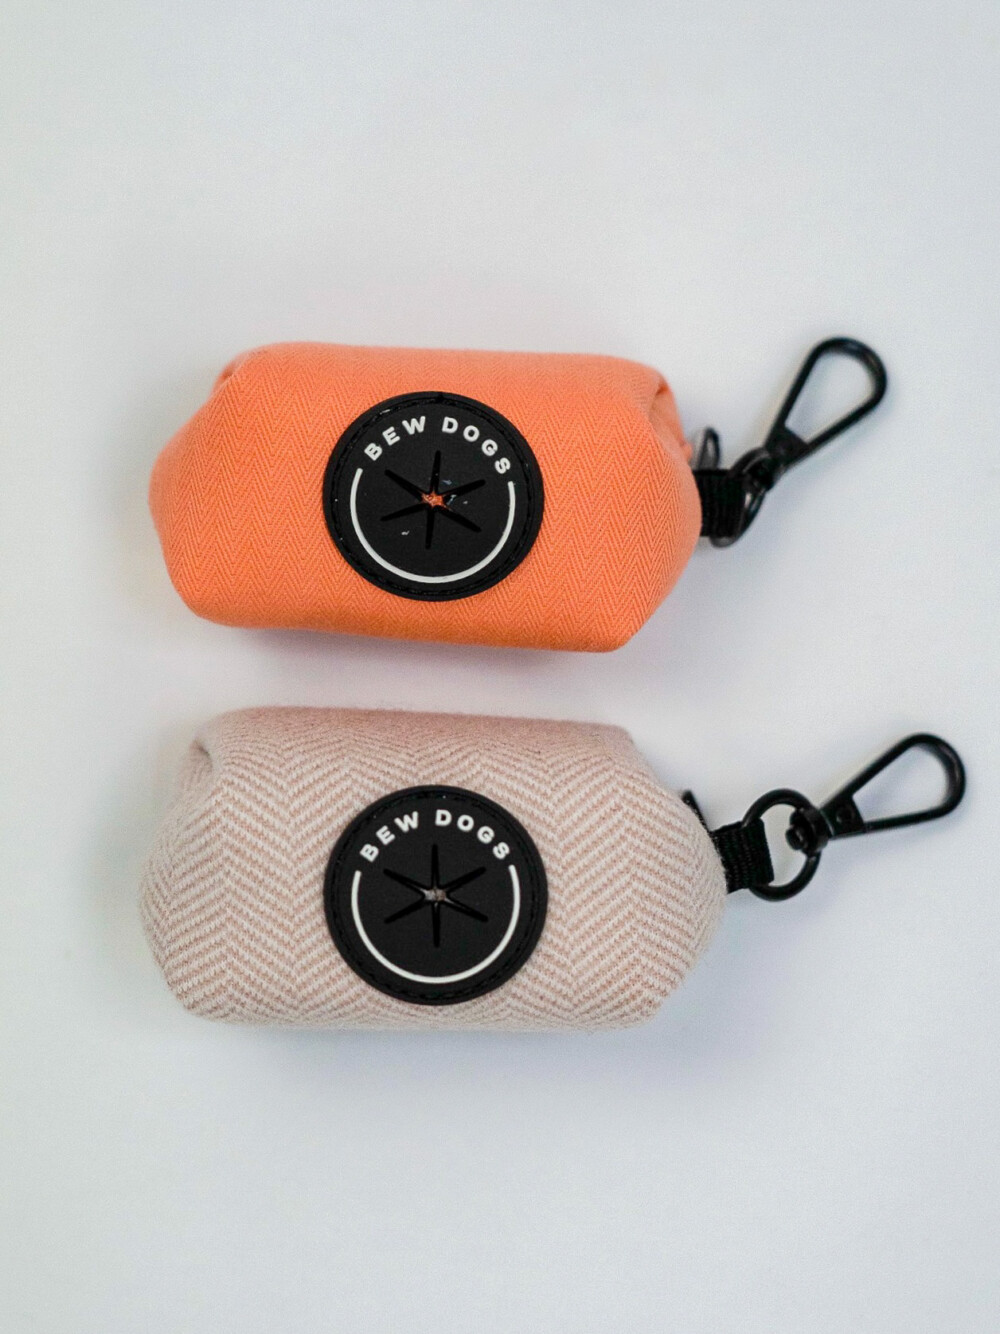 two dog poo bag holders, against a white background, in bright peach and lilac herringbone patterns